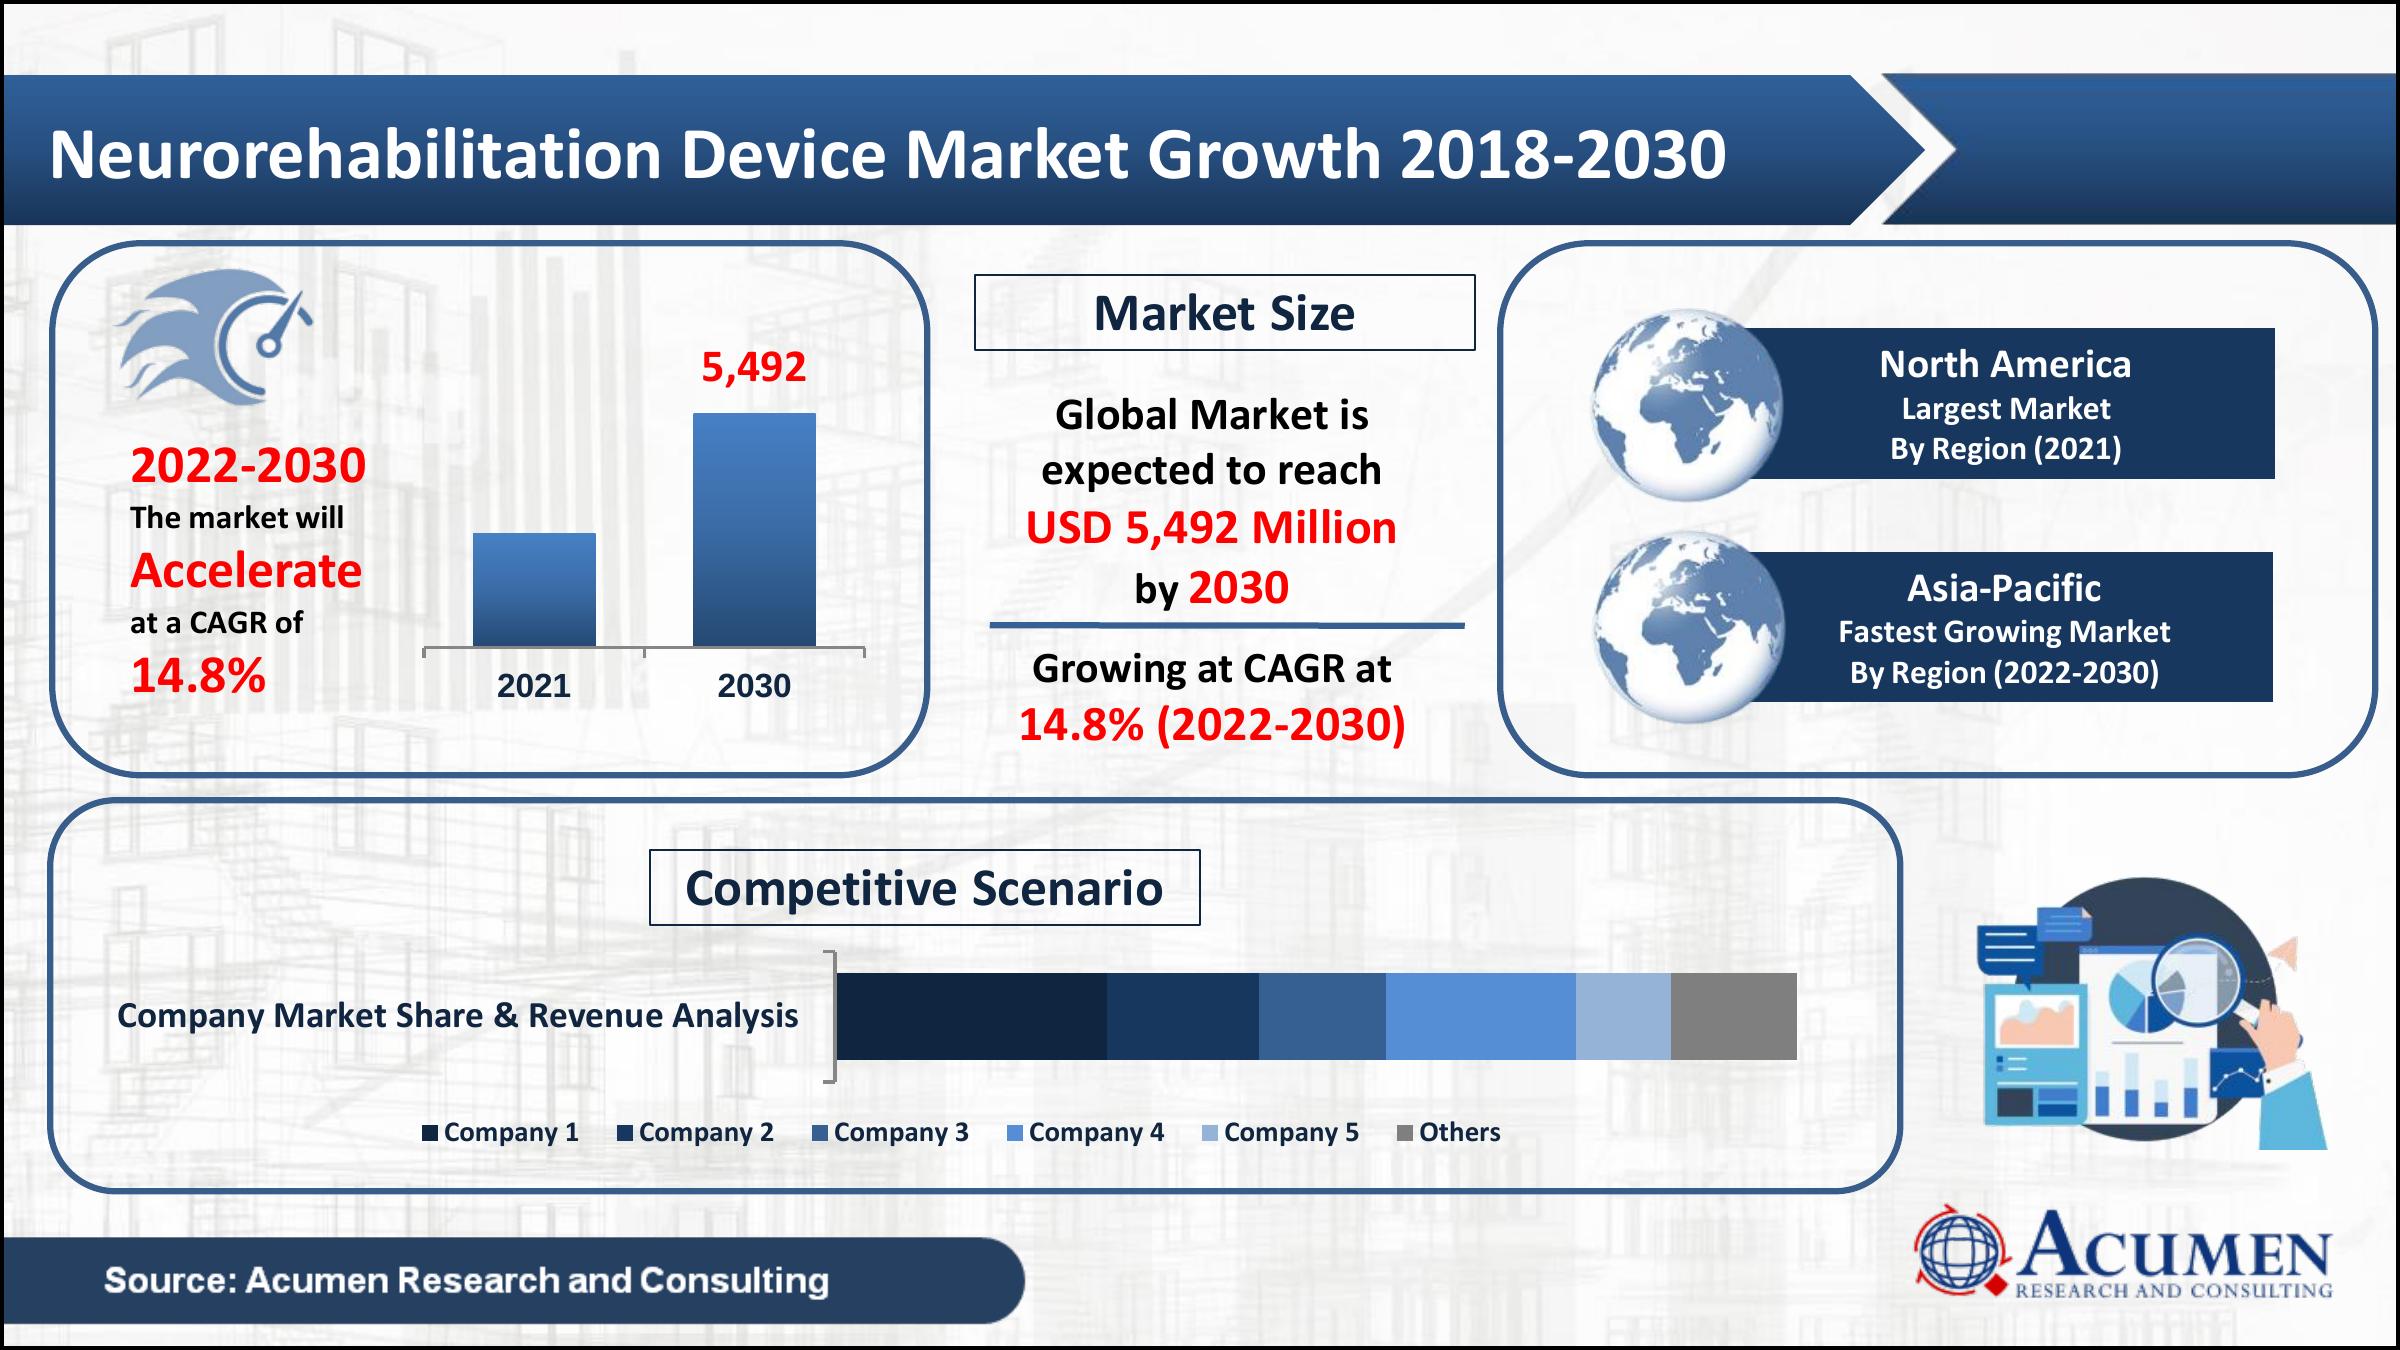 Global neurorehabilitation device market value was worth USD 1,625 Million in 2021, with a 14.8% CAGR from 2022 to 2030